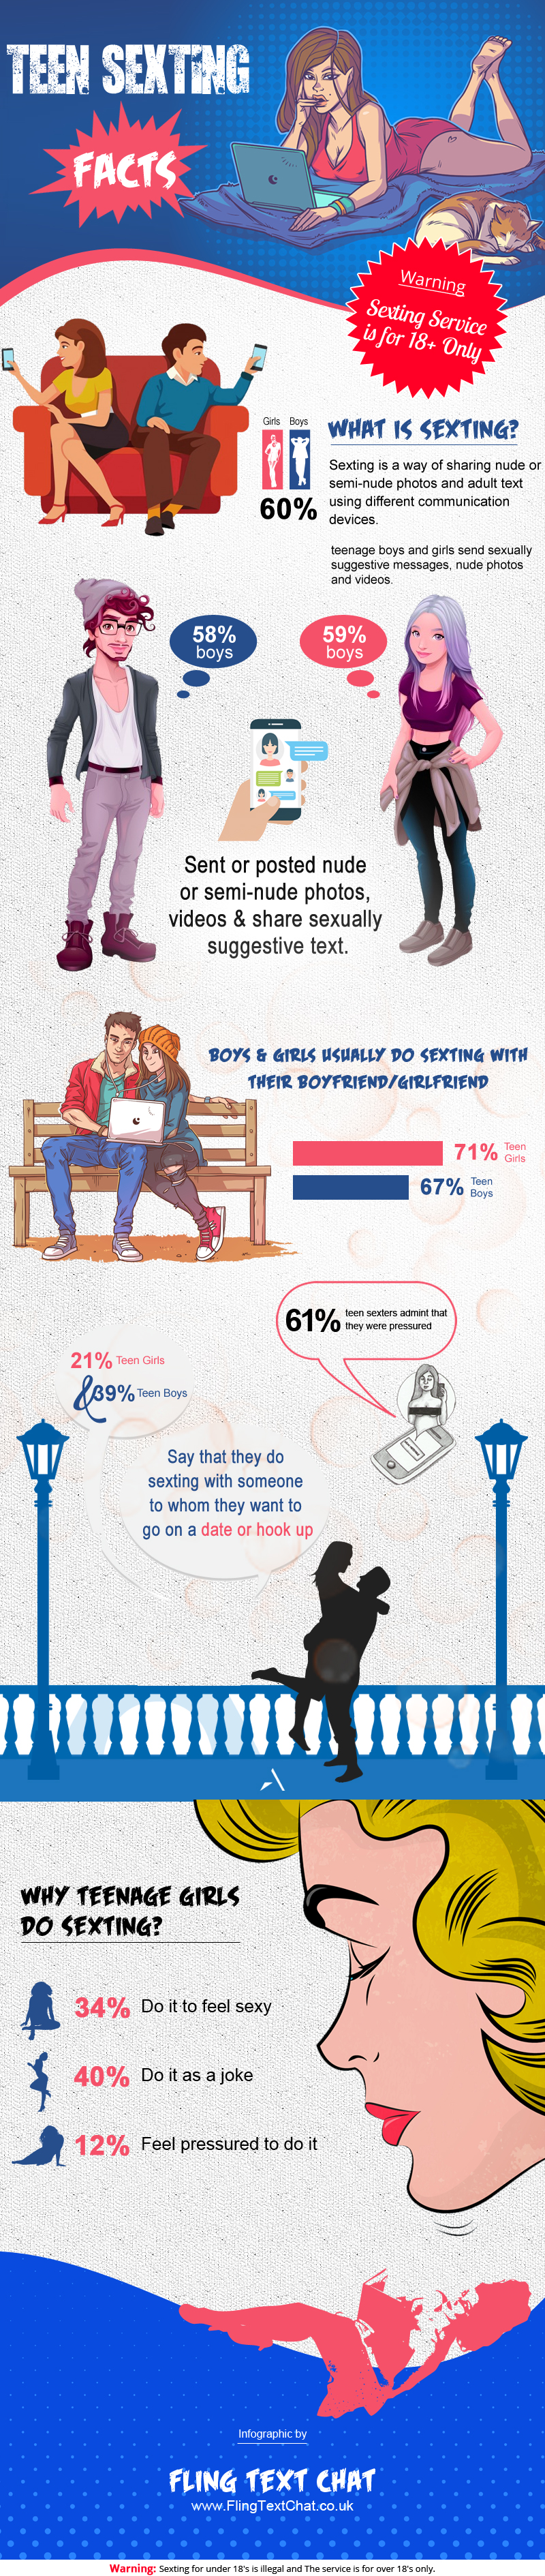 Teen Sexting Facts